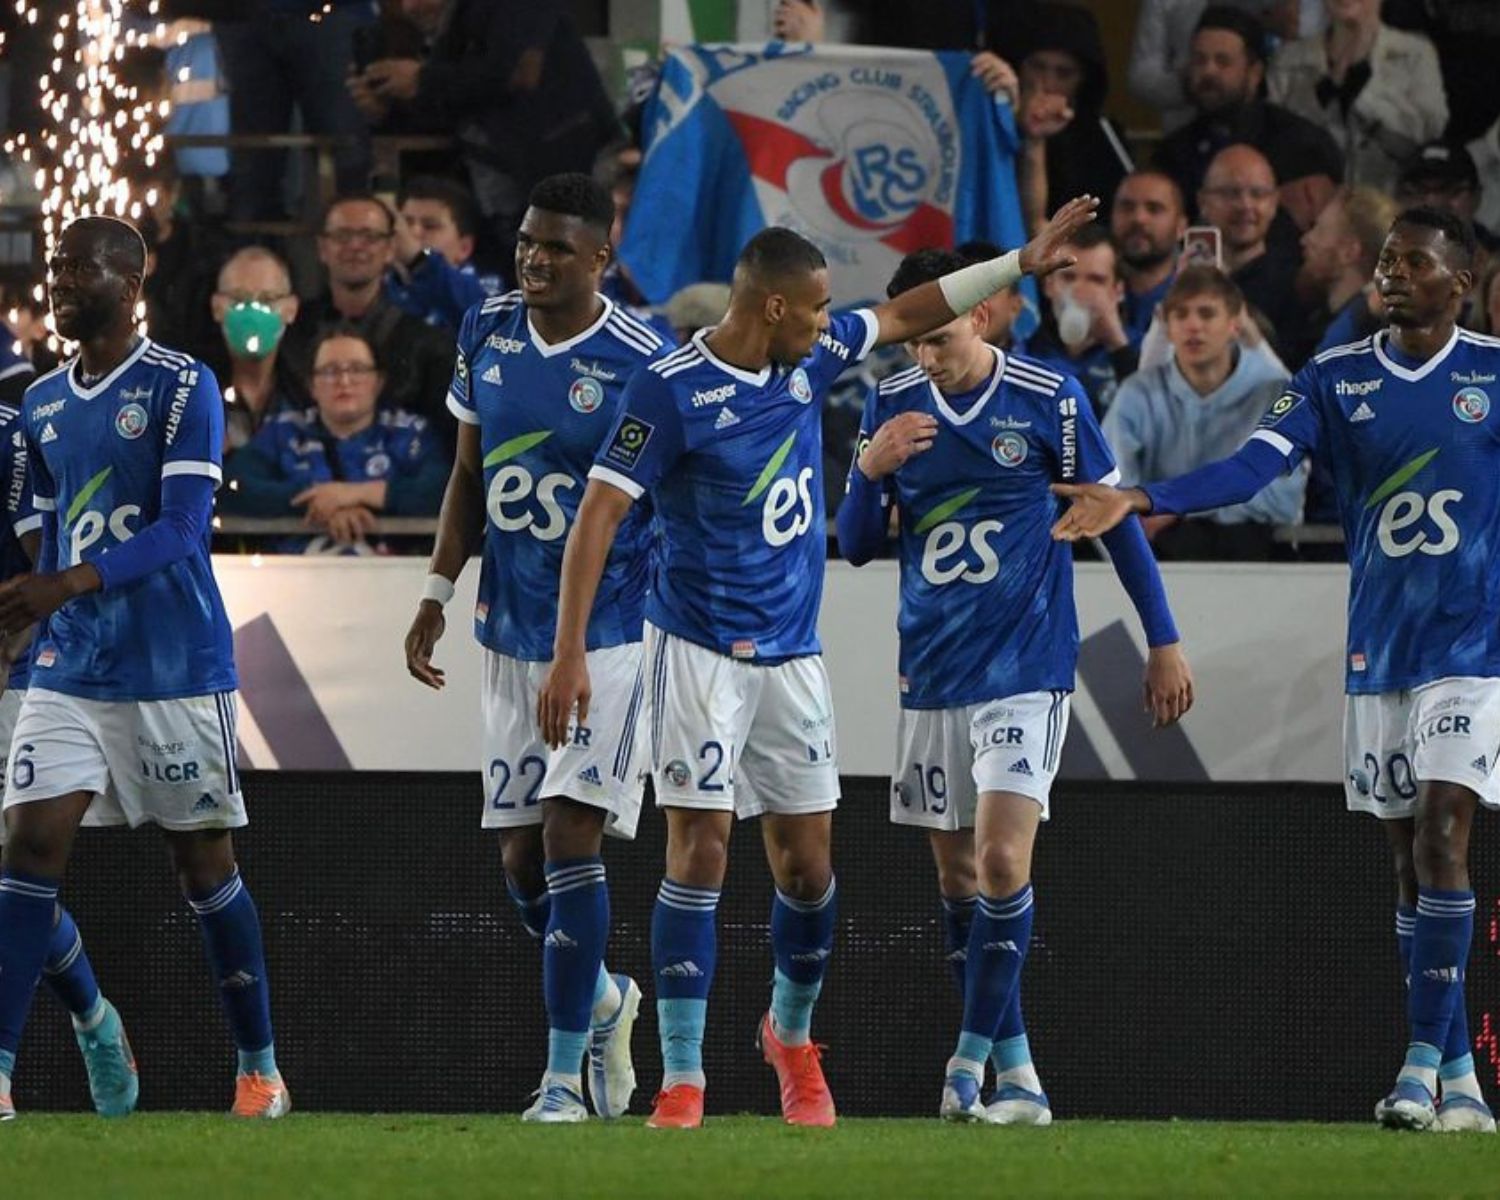 rc-strasbourg-alsace-10-football-club-facts